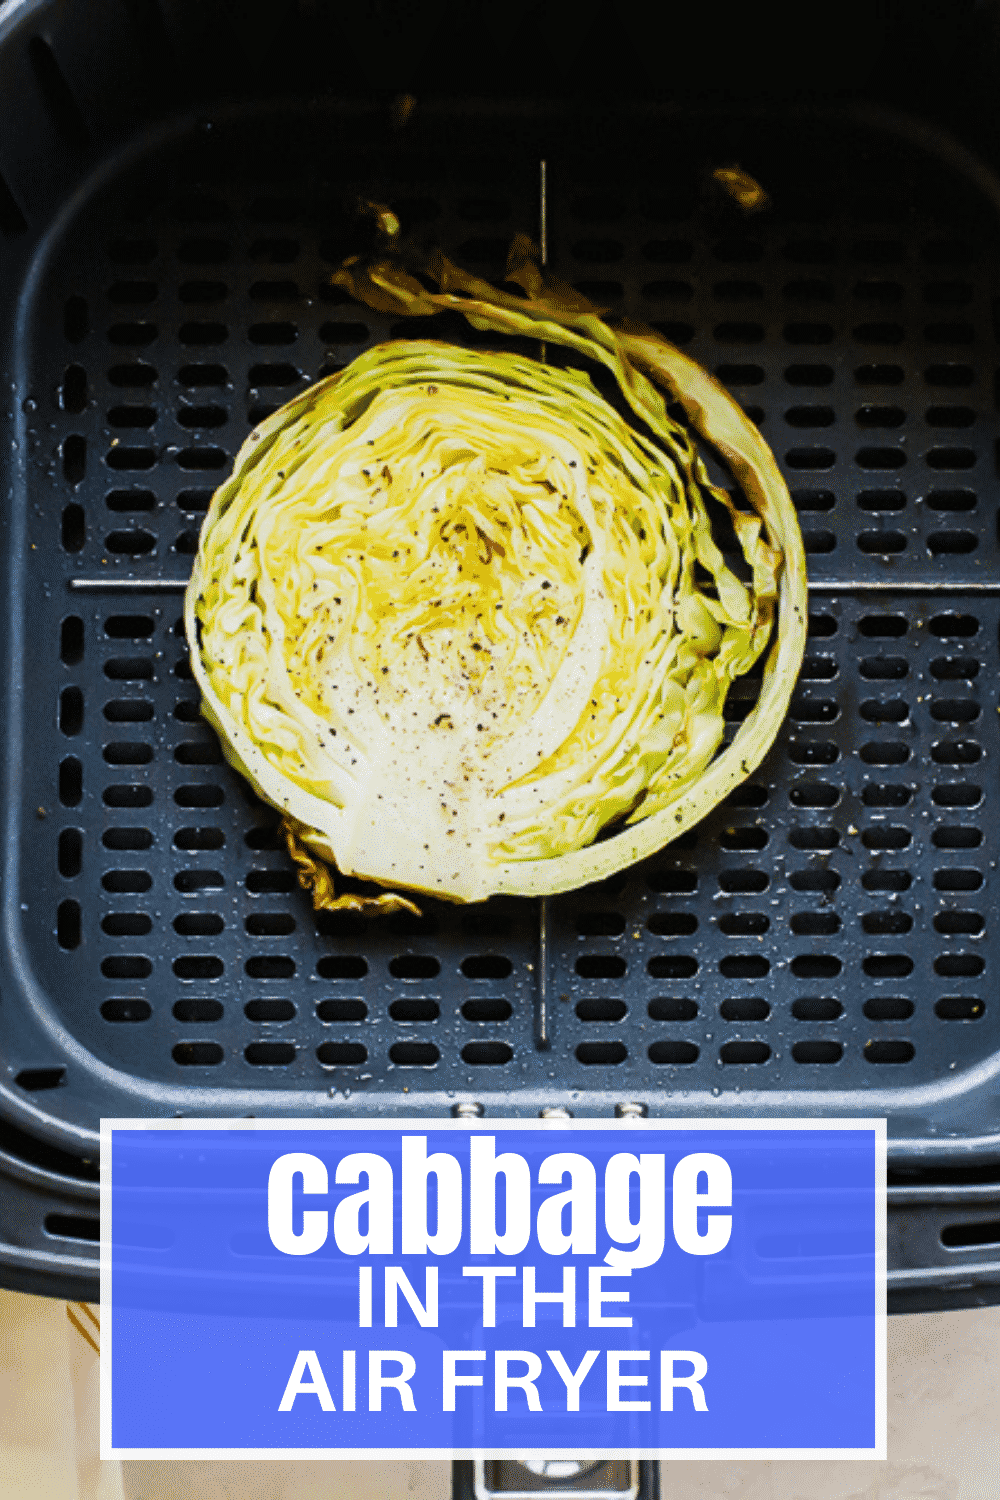 Air Fryer Cabbage Steaks are an amazing vegetarian main or side dish. They brown up beautifully in the air fryer with just a small amount of oil. #airfryer #veggies via @vegetarianmamma